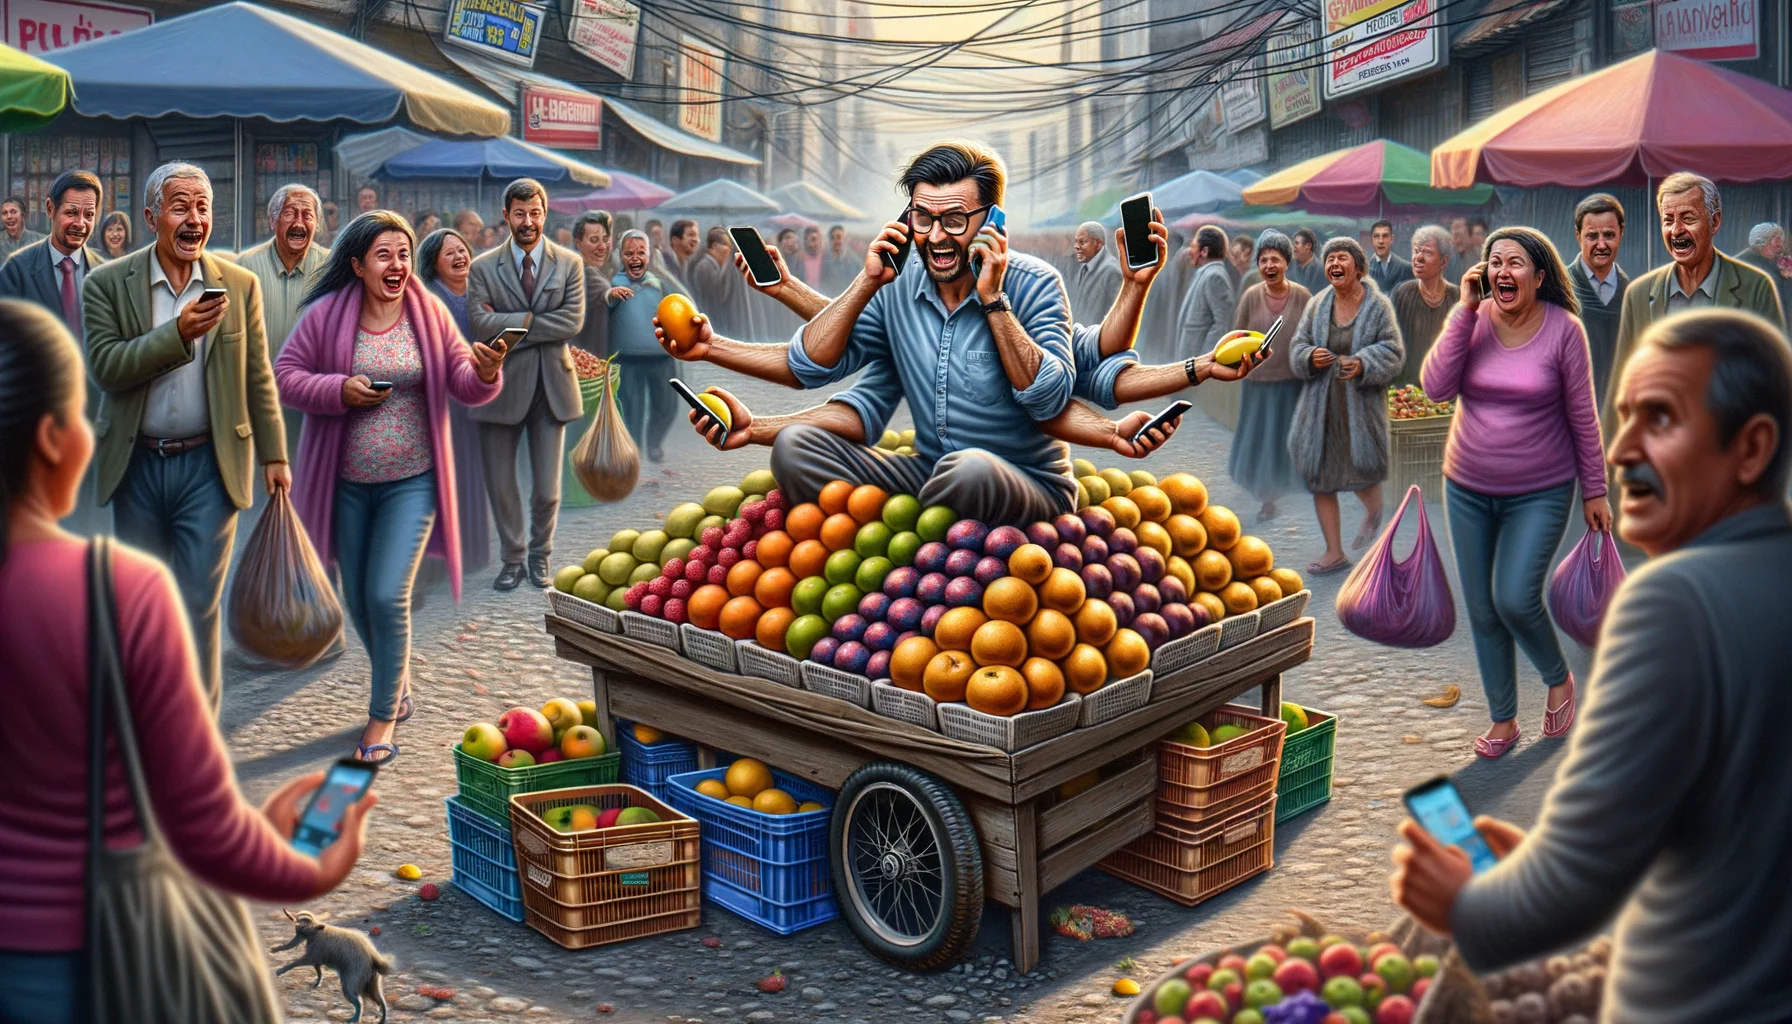 Generate a humorous image depicting a typical street market bustling with activity. Let the main scene be a fruit vendor who is simultaneously talking on three different phones, each representing a different affiliate program. The vendor is flustered but determined, using their feet to hand over fruits to customers. In the background, patrons are laughing together, delighted by the vendor's antics. Around the market, other vendors showcase bemused expressions as they watch the scene unfold.